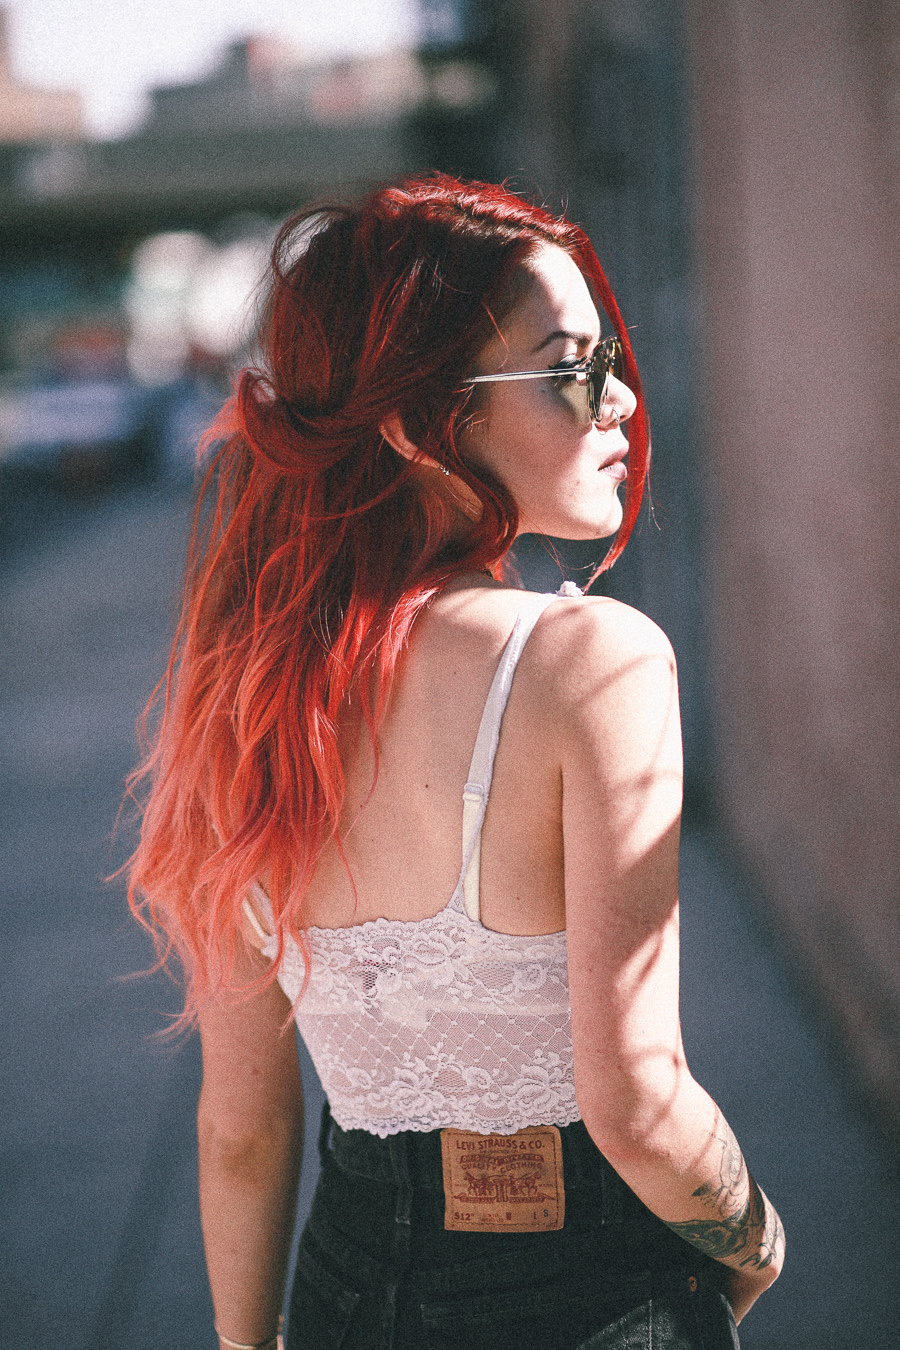 Le Happy wearing white lace bustier